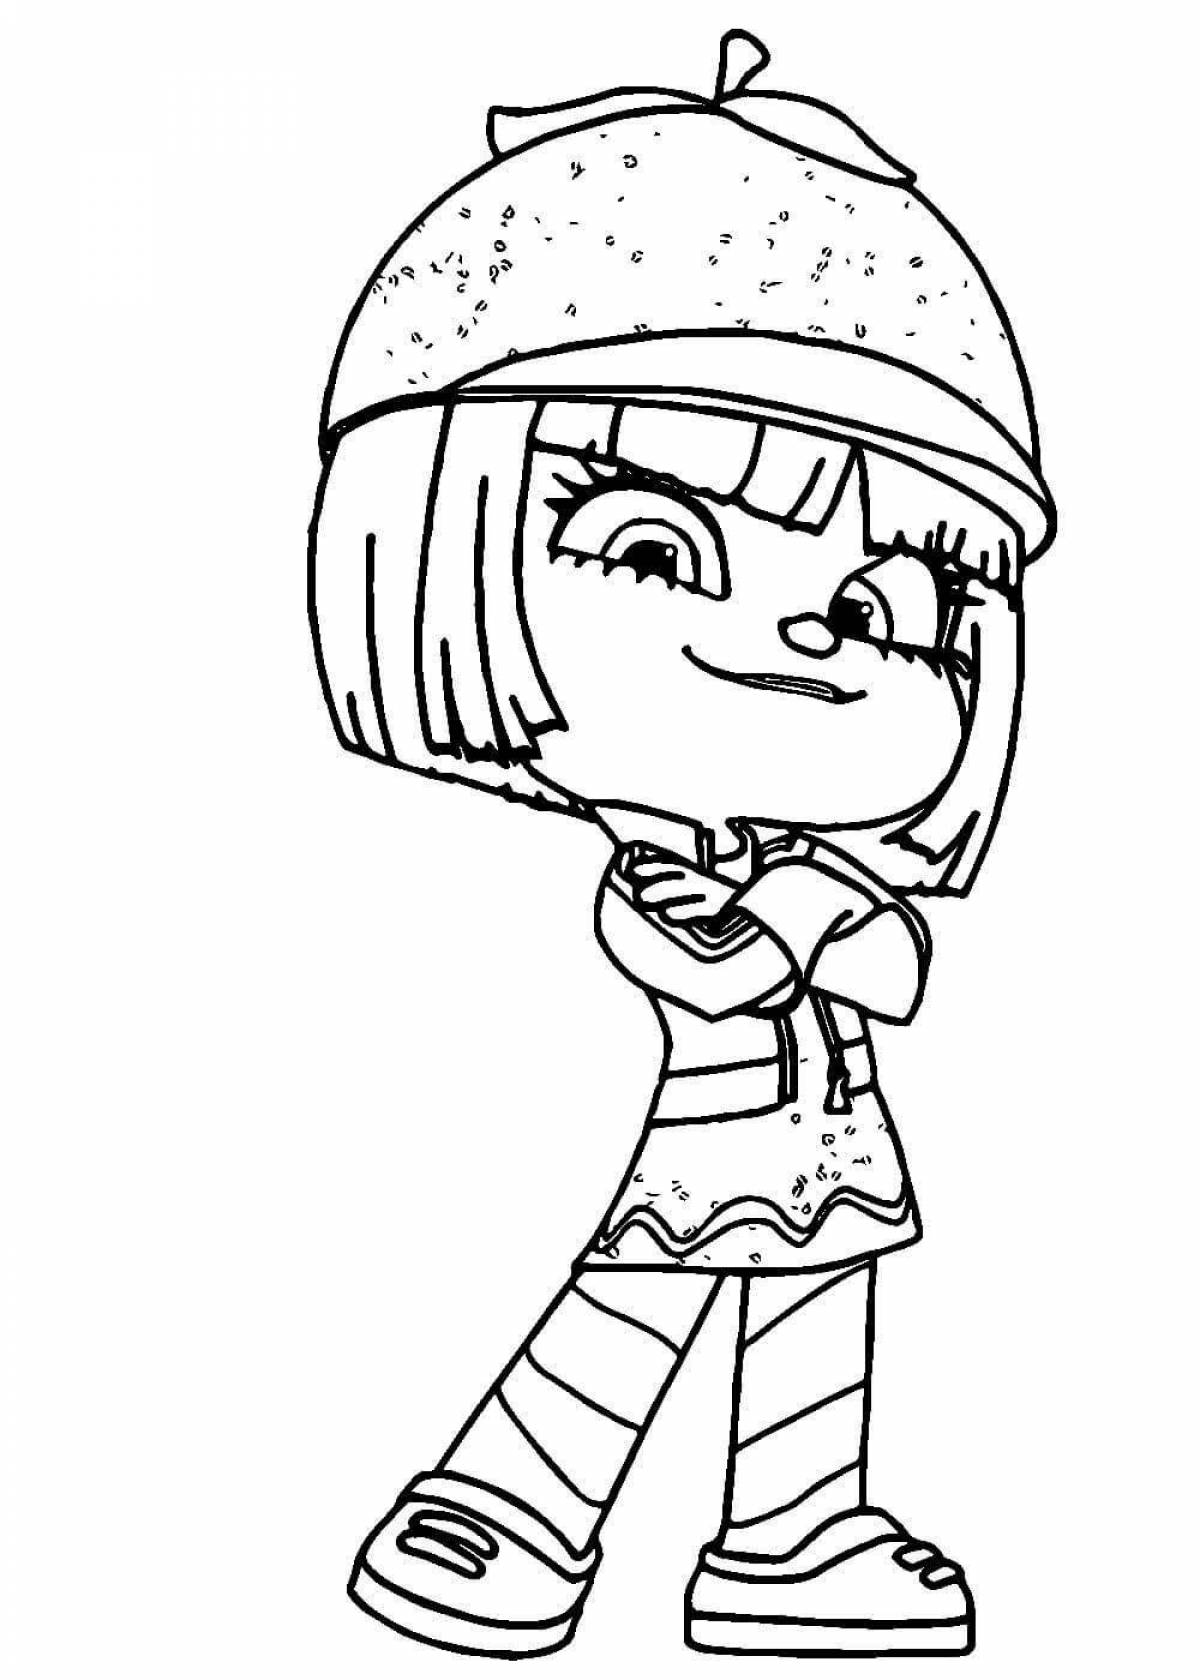 Animated penelope coloring book